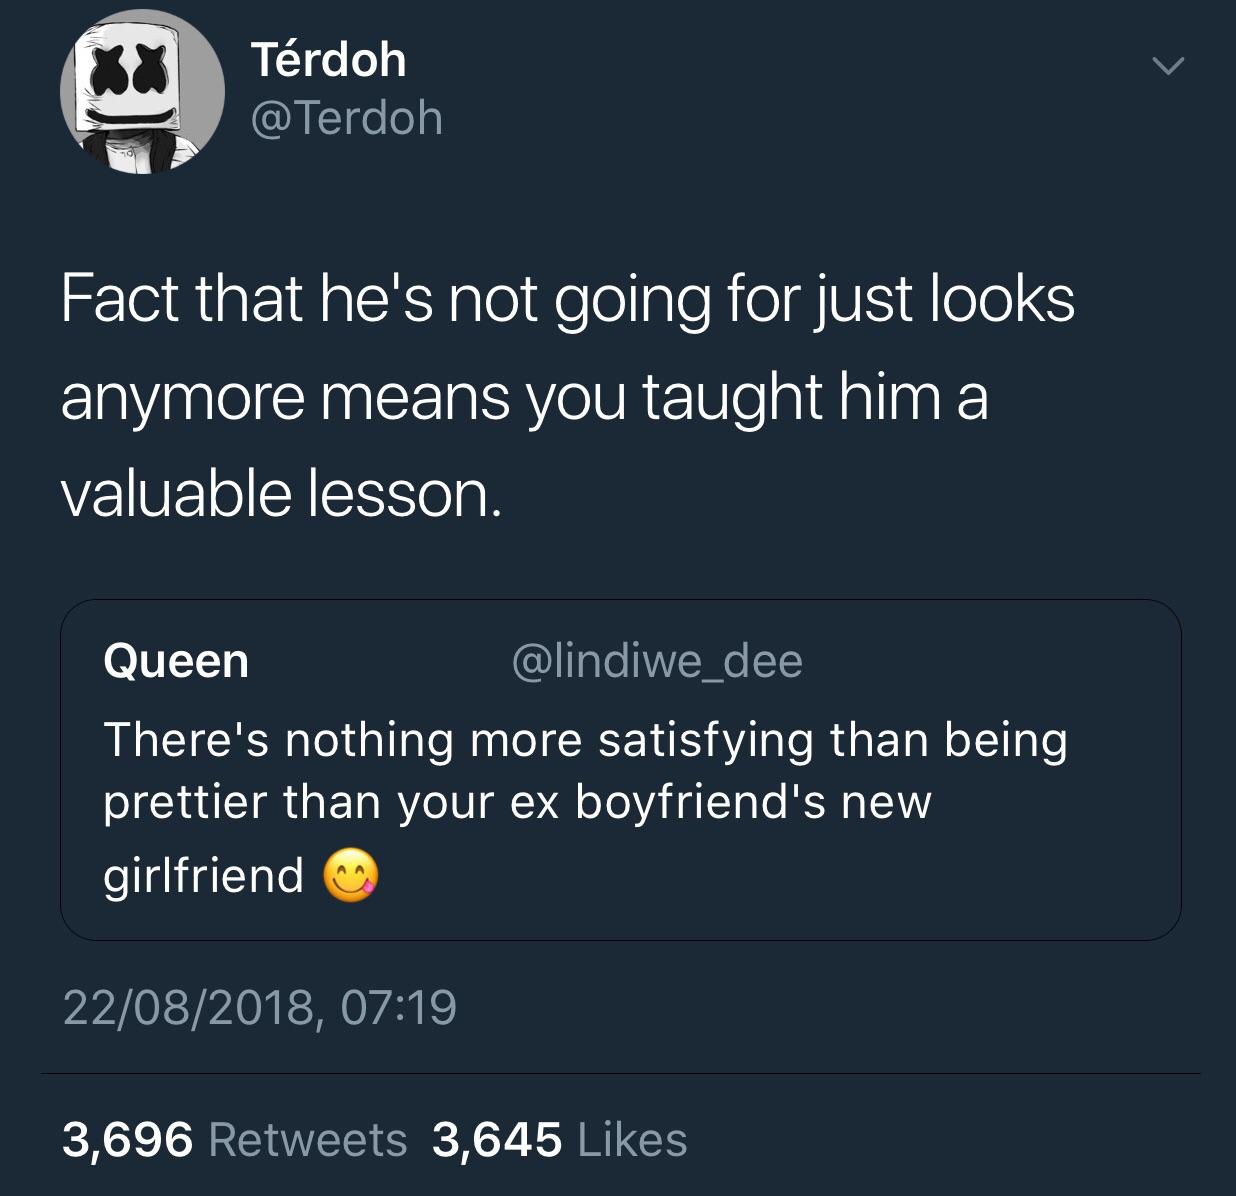 screenshot - Trdon Trdoh Fact that he's not going for just looks anymore means you taught him a valuable lesson. Queen There's nothing more satisfying than being prettier than your ex boyfriend's new girlfriend 22082018, 3,696 3,645